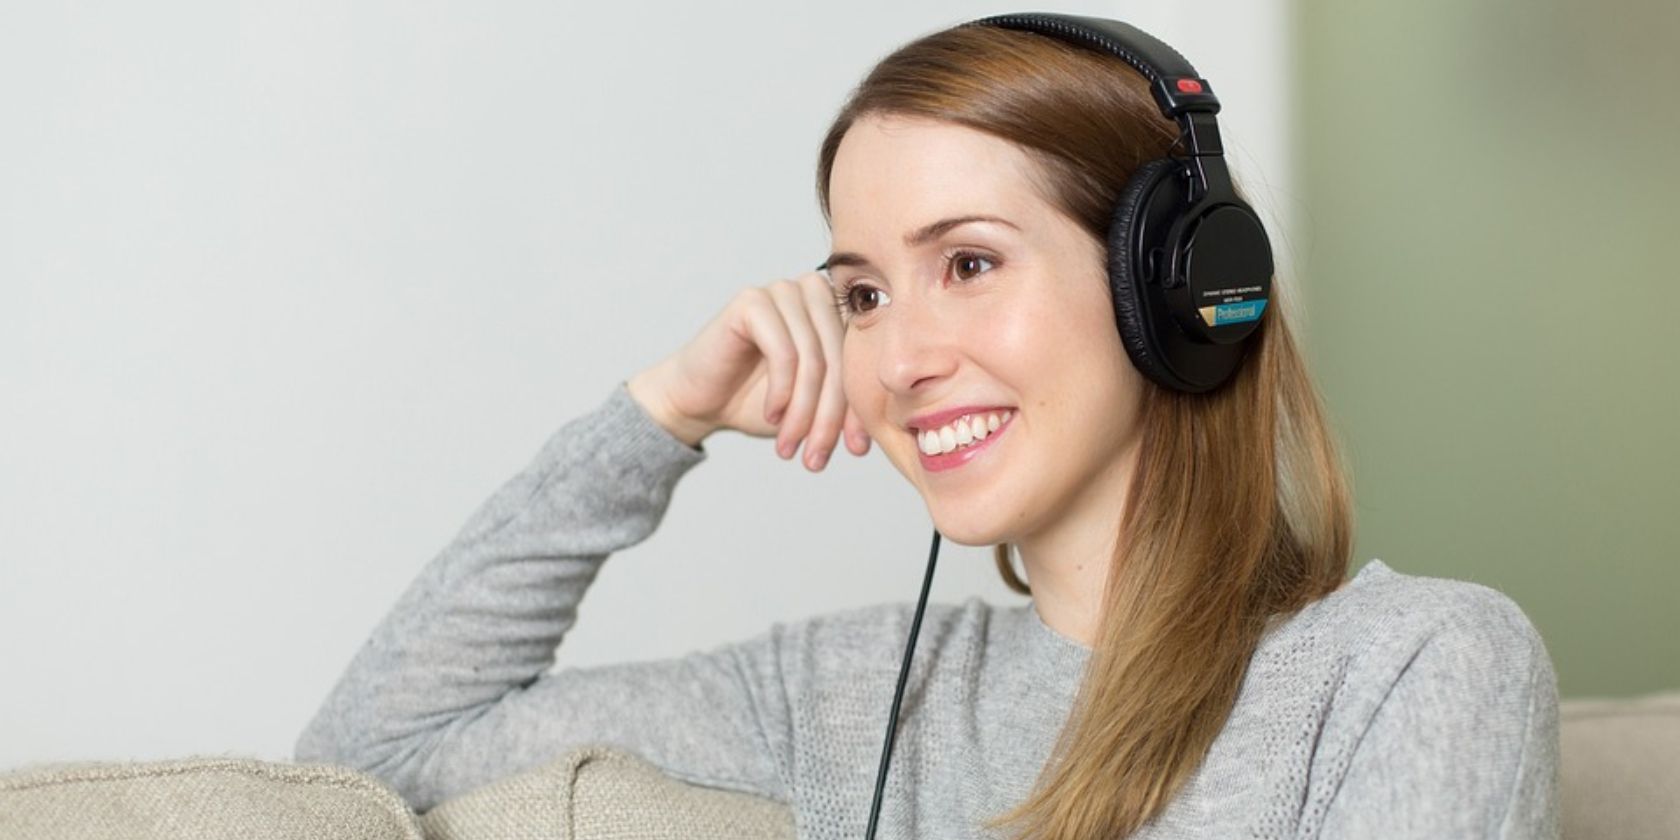 a lady listening to music with headphones on